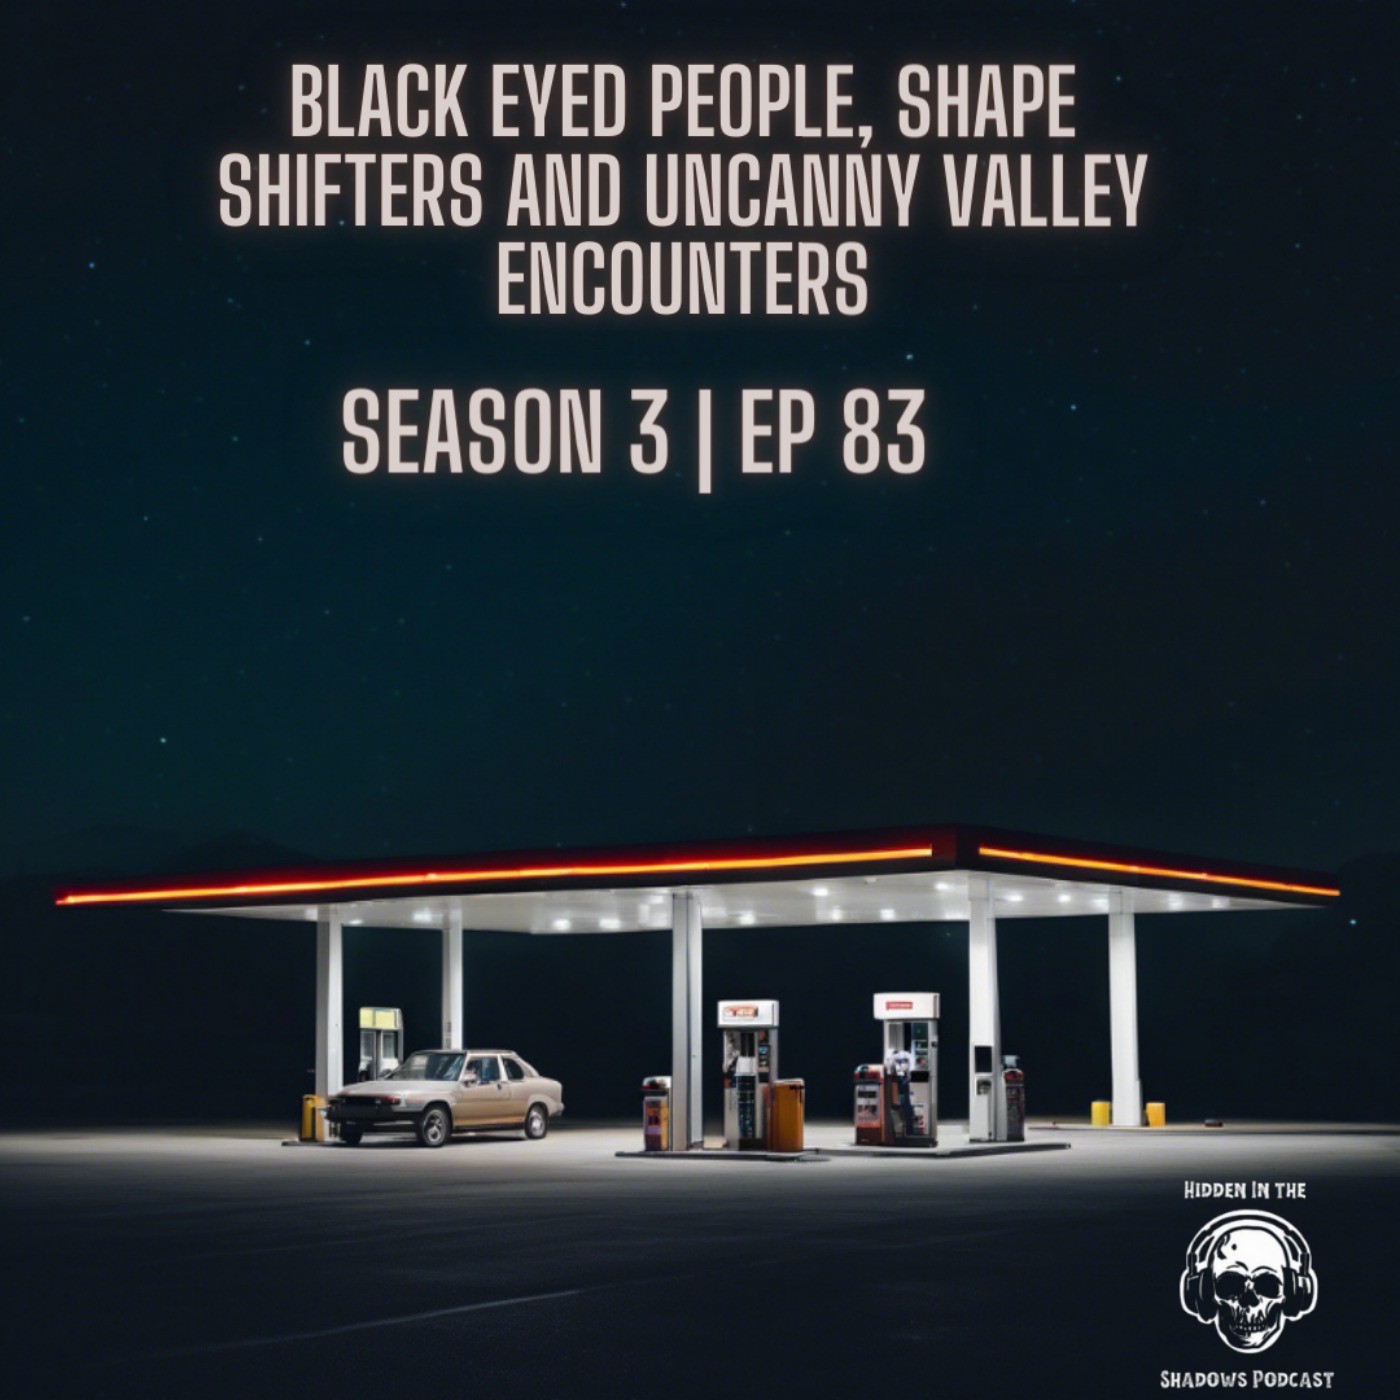 Black Eyed People, Shape Shifters and Uncanny Valley Encounters & Theories